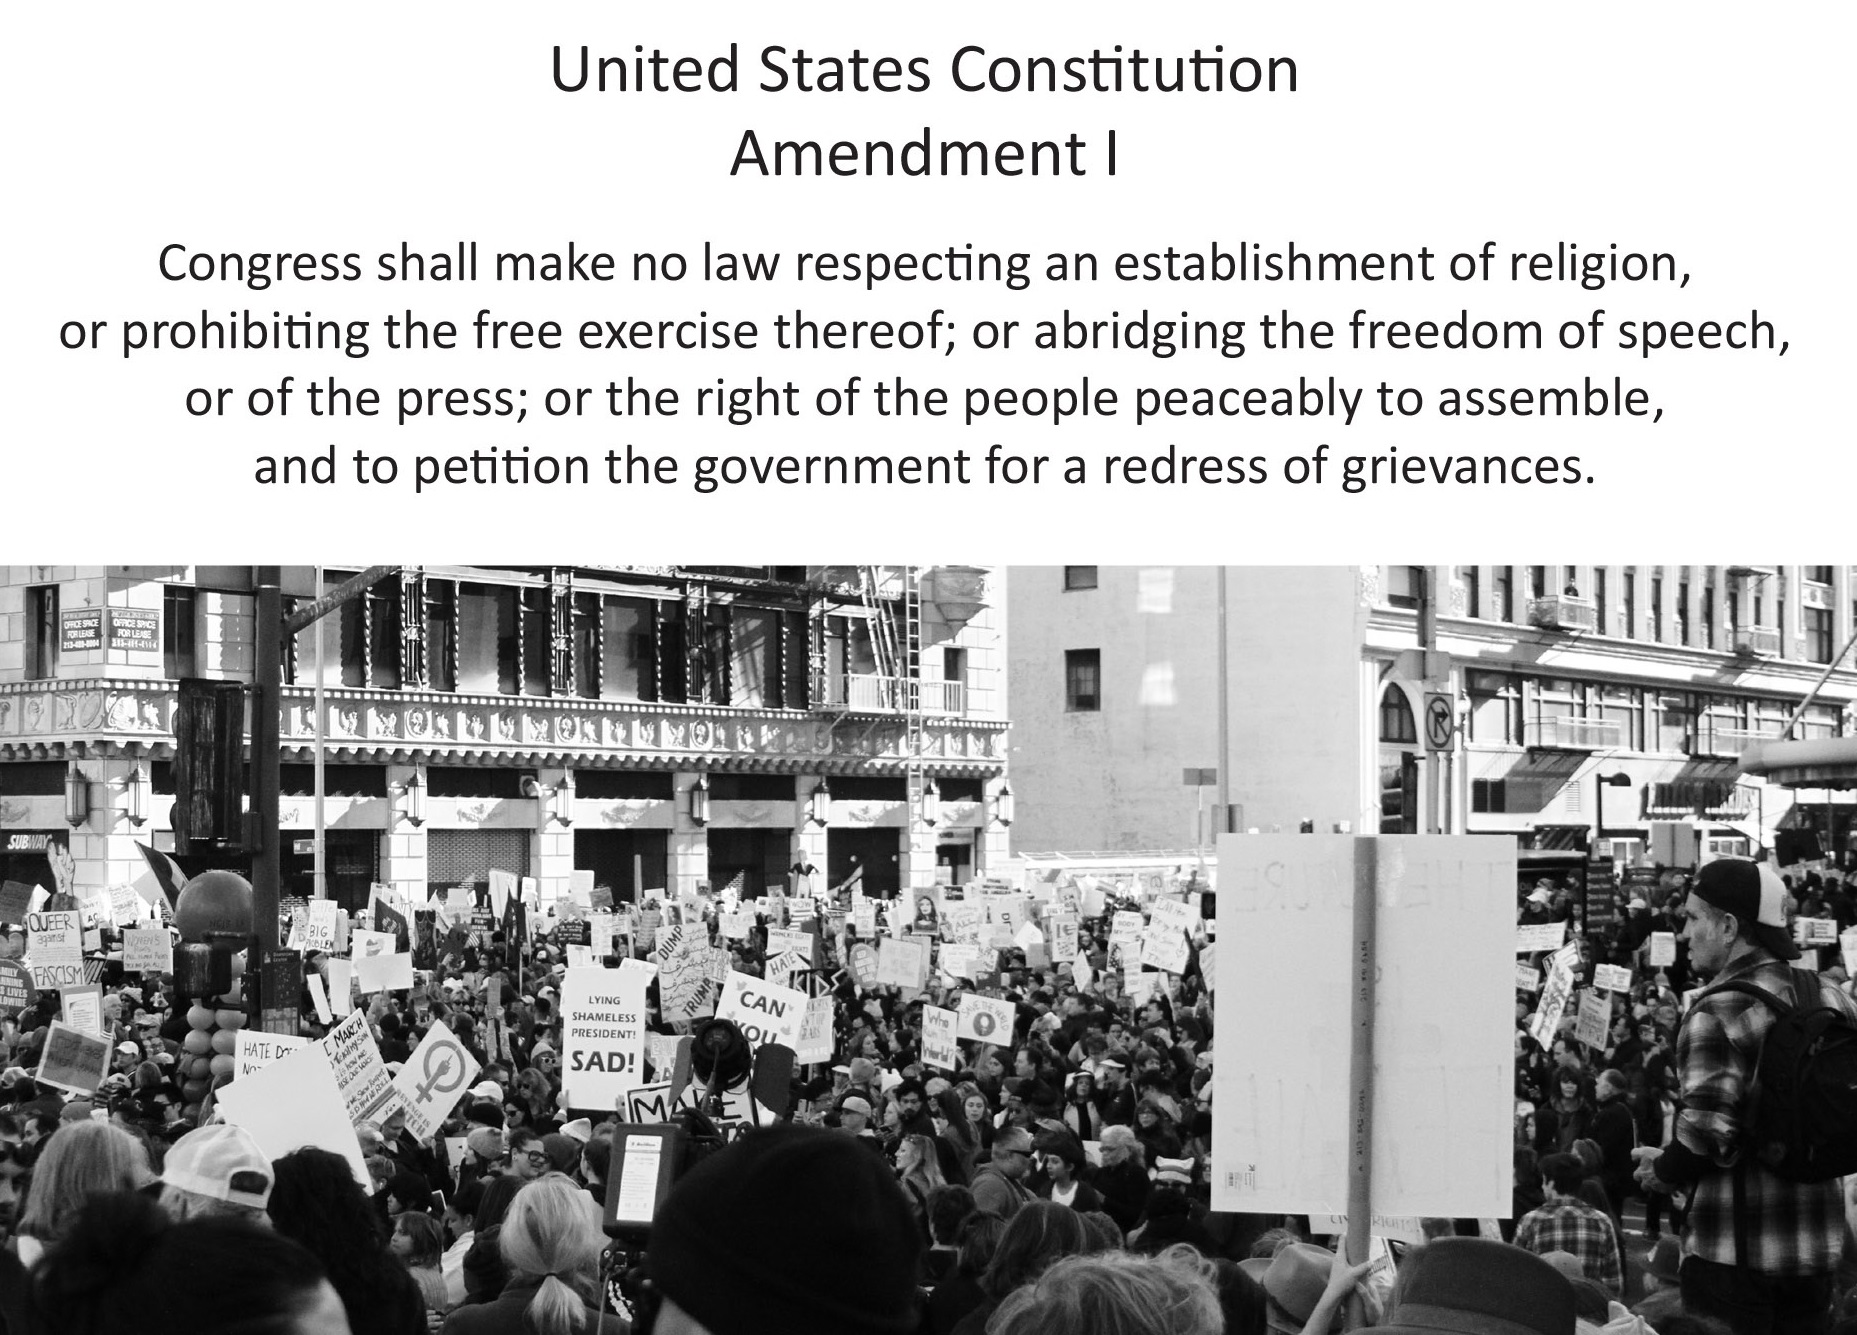 United States Constitution Amendment I: Congress shall make no law respecting an establishment of religion, or prohibiting the free exercise thereof; or abridging the freedom of speech, or of the press; or the right of the people peaceable to assemble, and to petition the government for a redress of grievances.